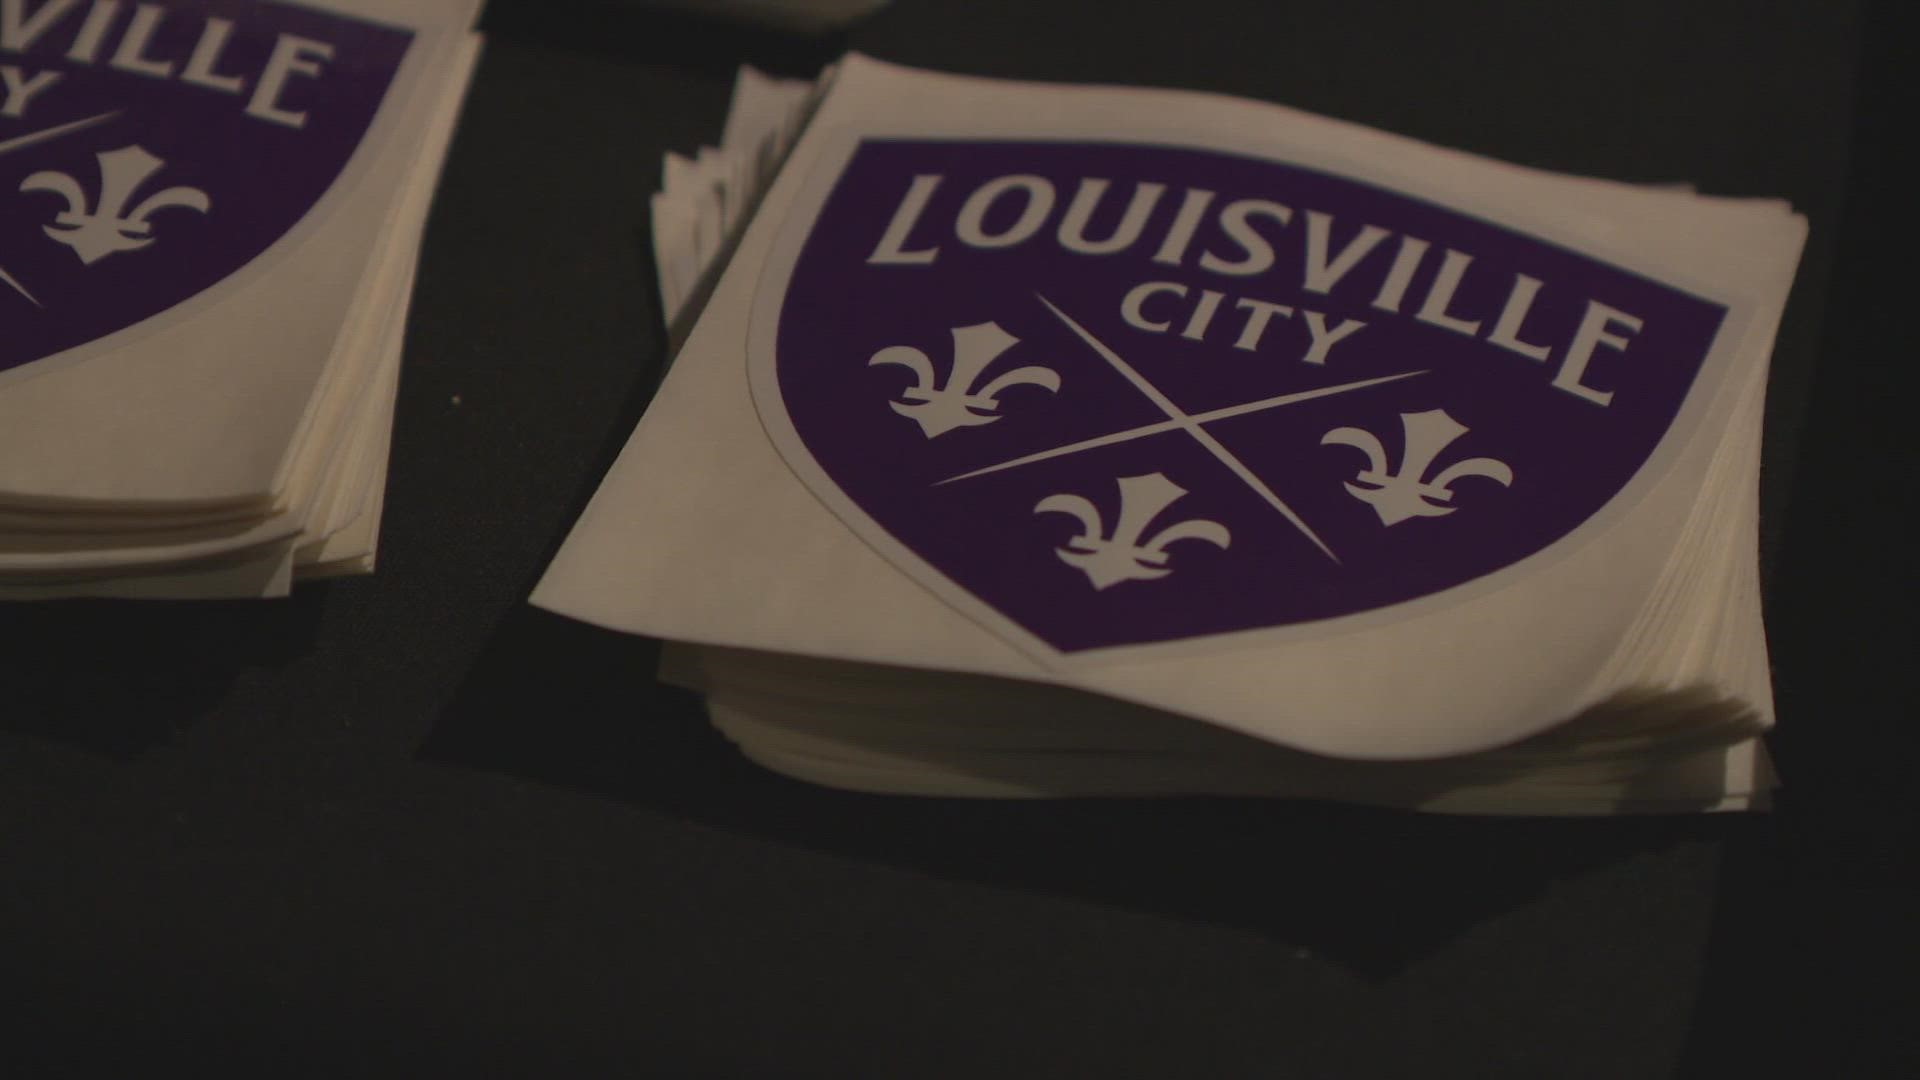 Fans of the Louisville football club bonded during the USL championship, despite them falling 3-1 to San Antonio.